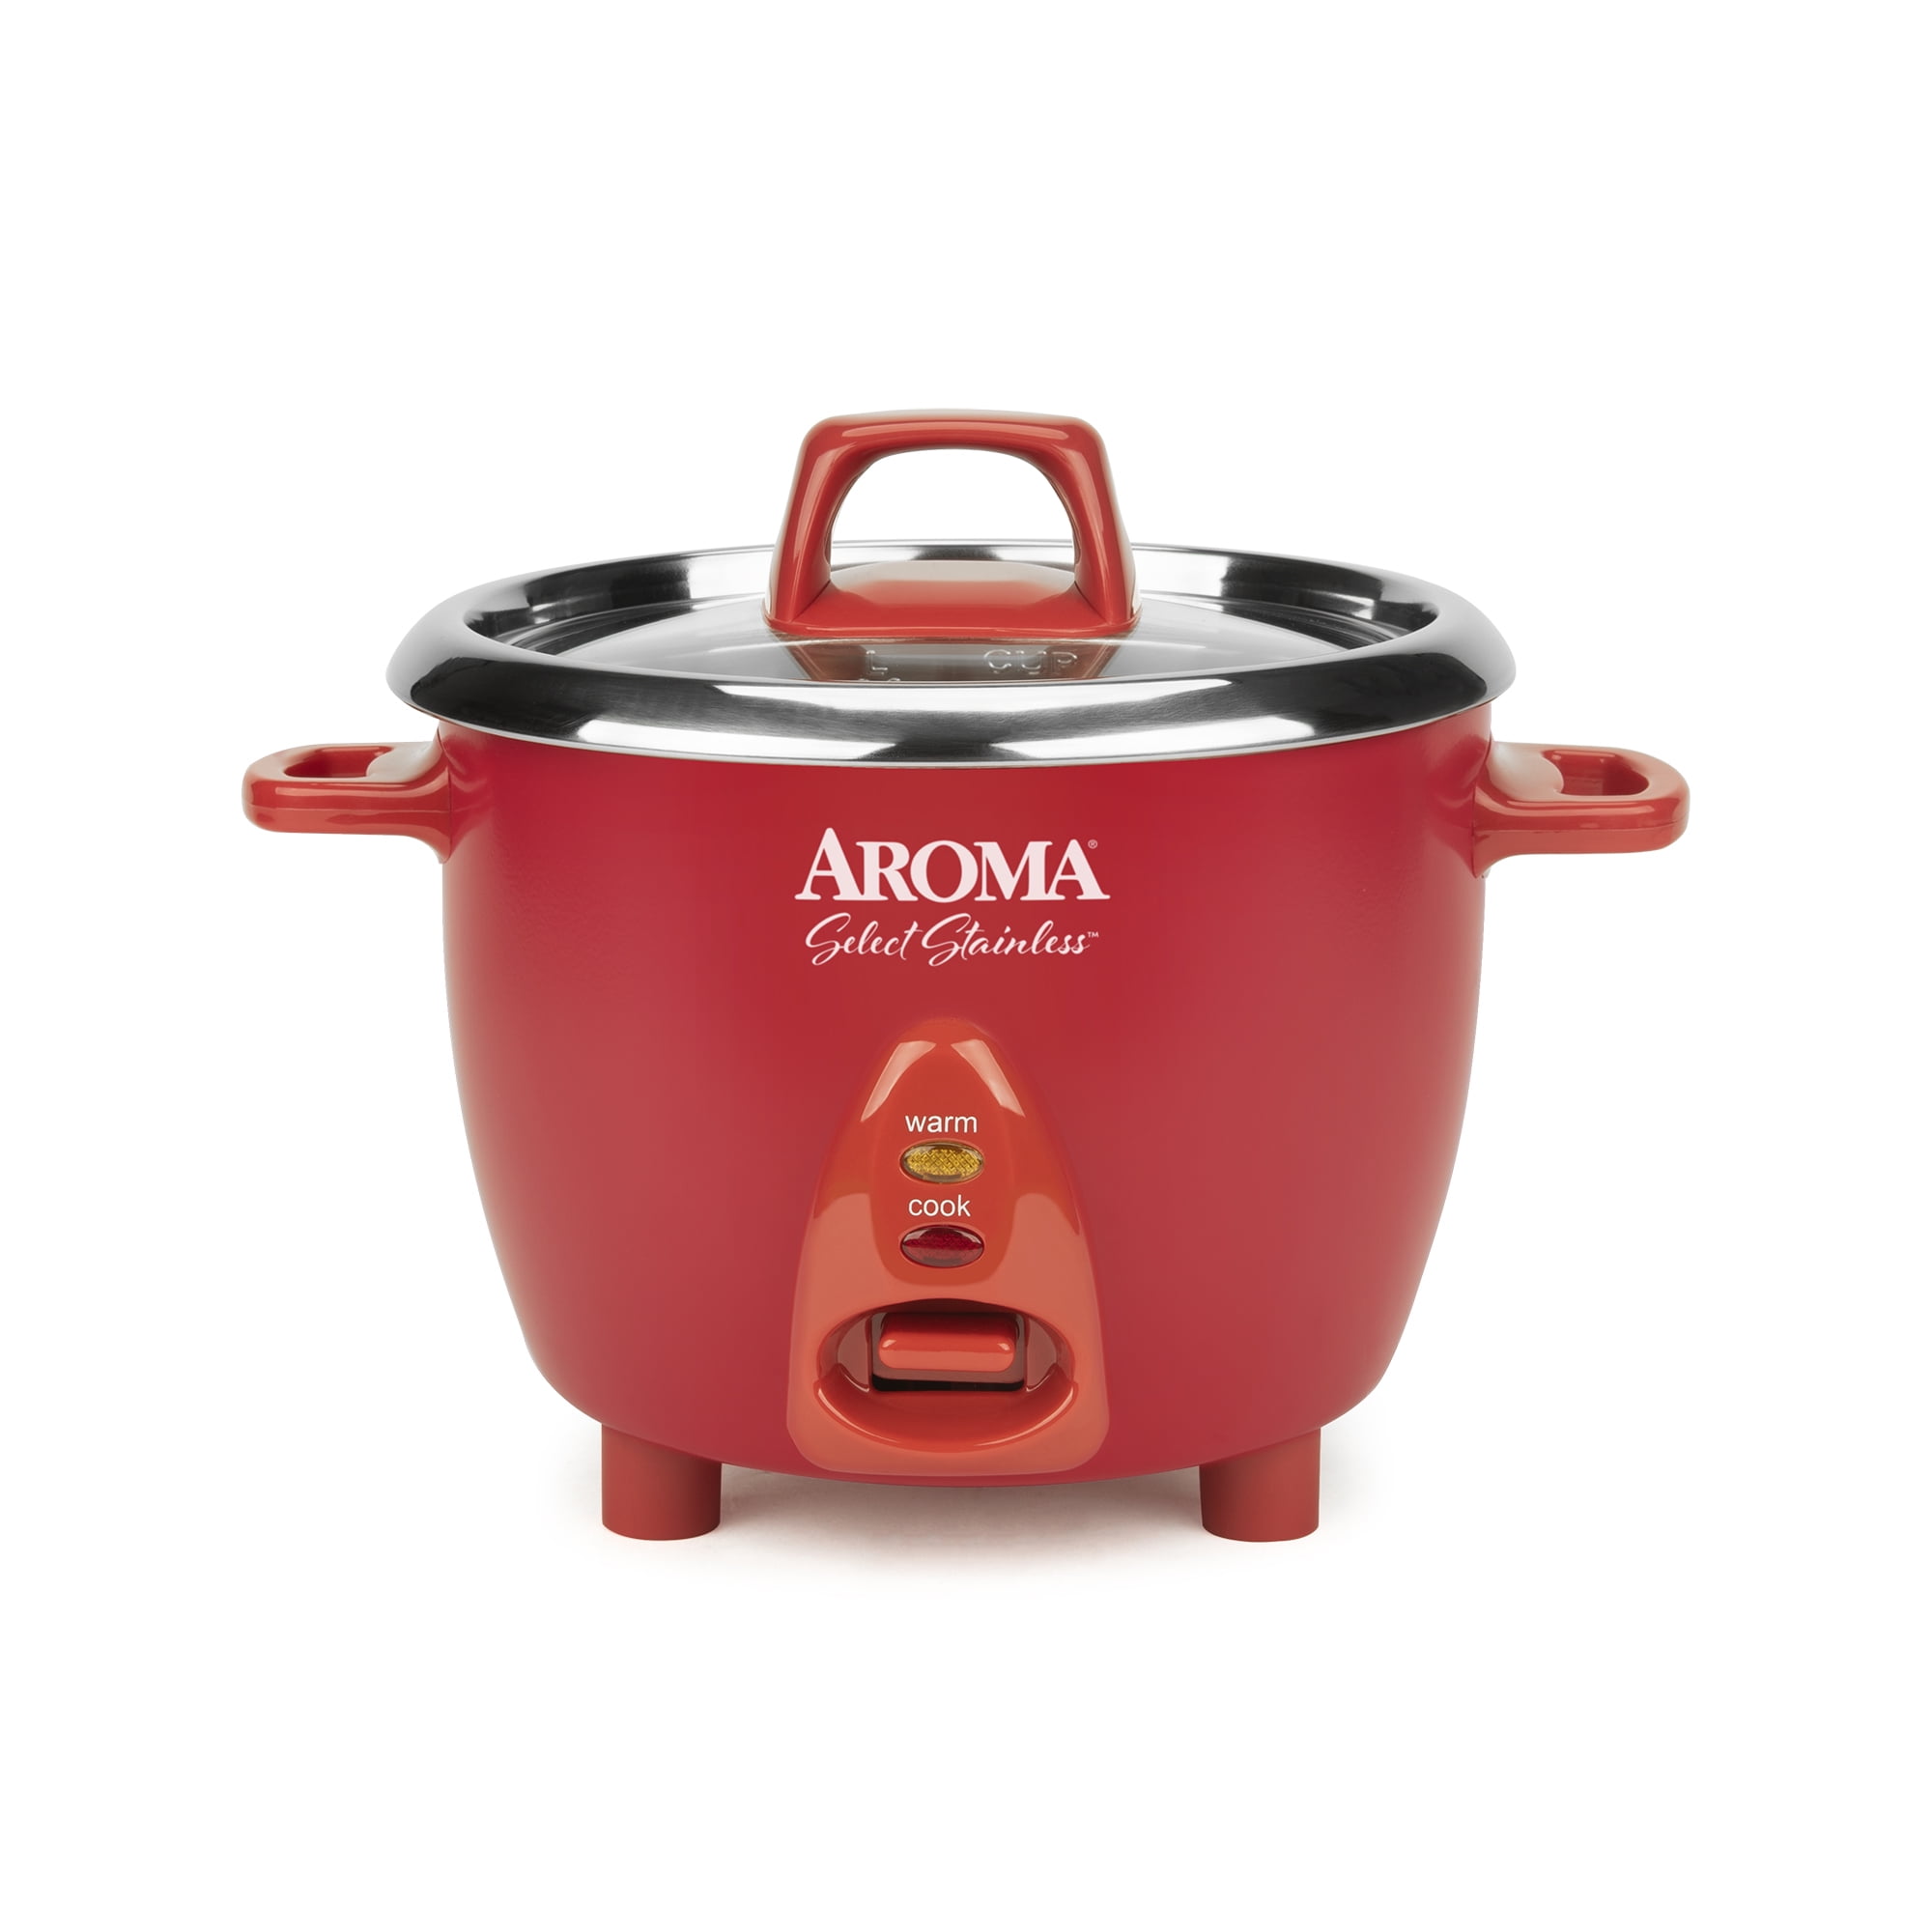 Aroma14-Cup (Cooked) / 3Qt. Select Stainless Rice & Grain Cooker, Stainless  Steel Inner Pot, One-Touch Operation, Automatic Warm Mode, Stainless Steel  Steam Tray Included, White (Arc-757-1Sg)